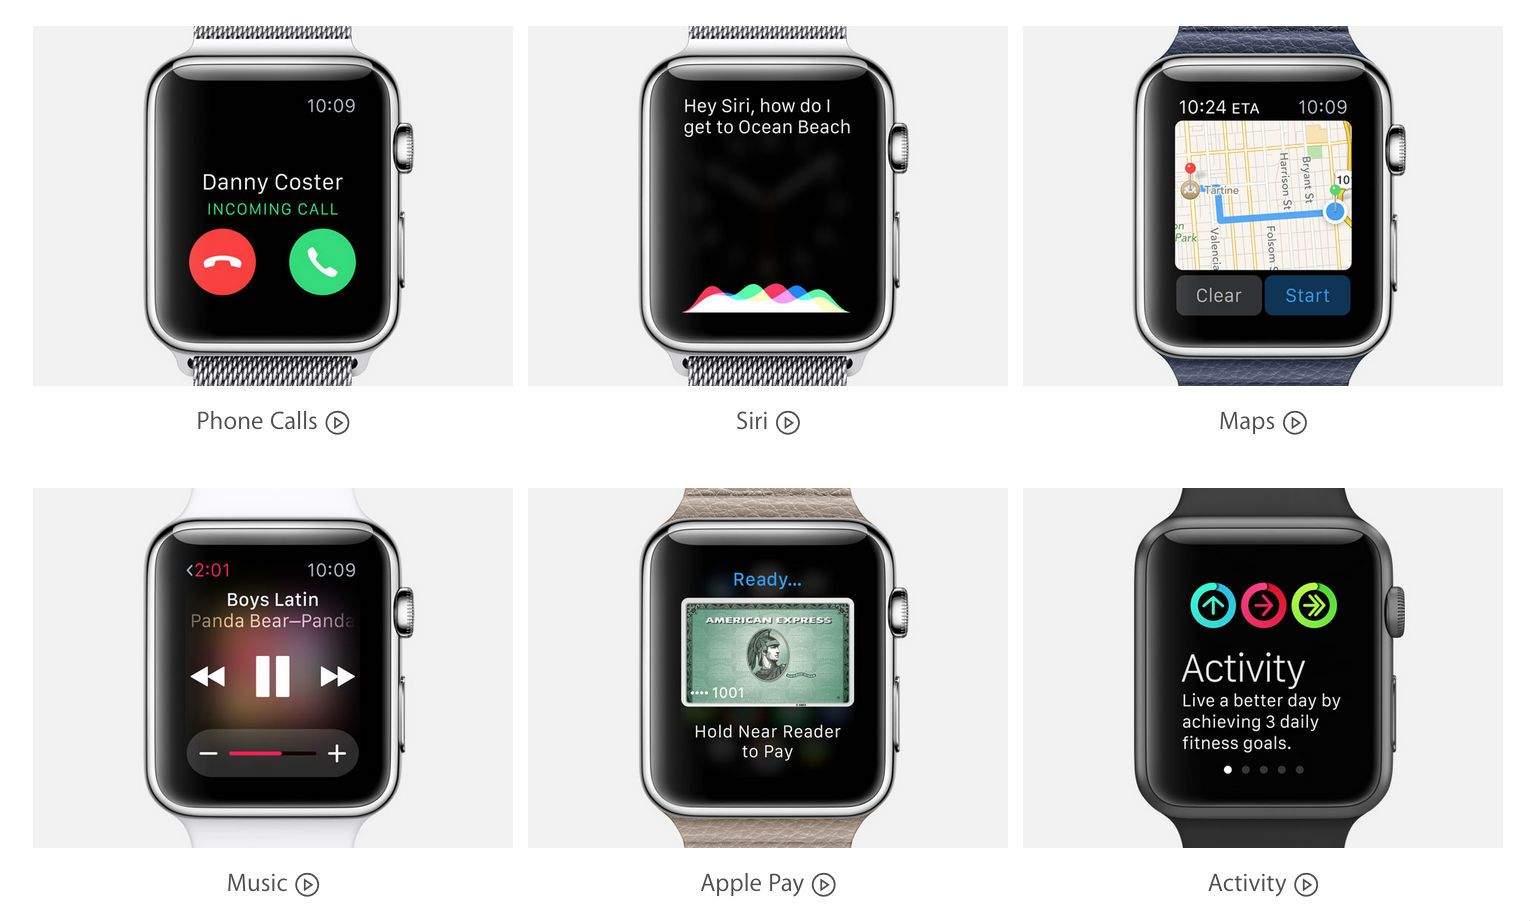 The Guided Tour videos are a great way to get to know the Apple Watch. Photo: Apple